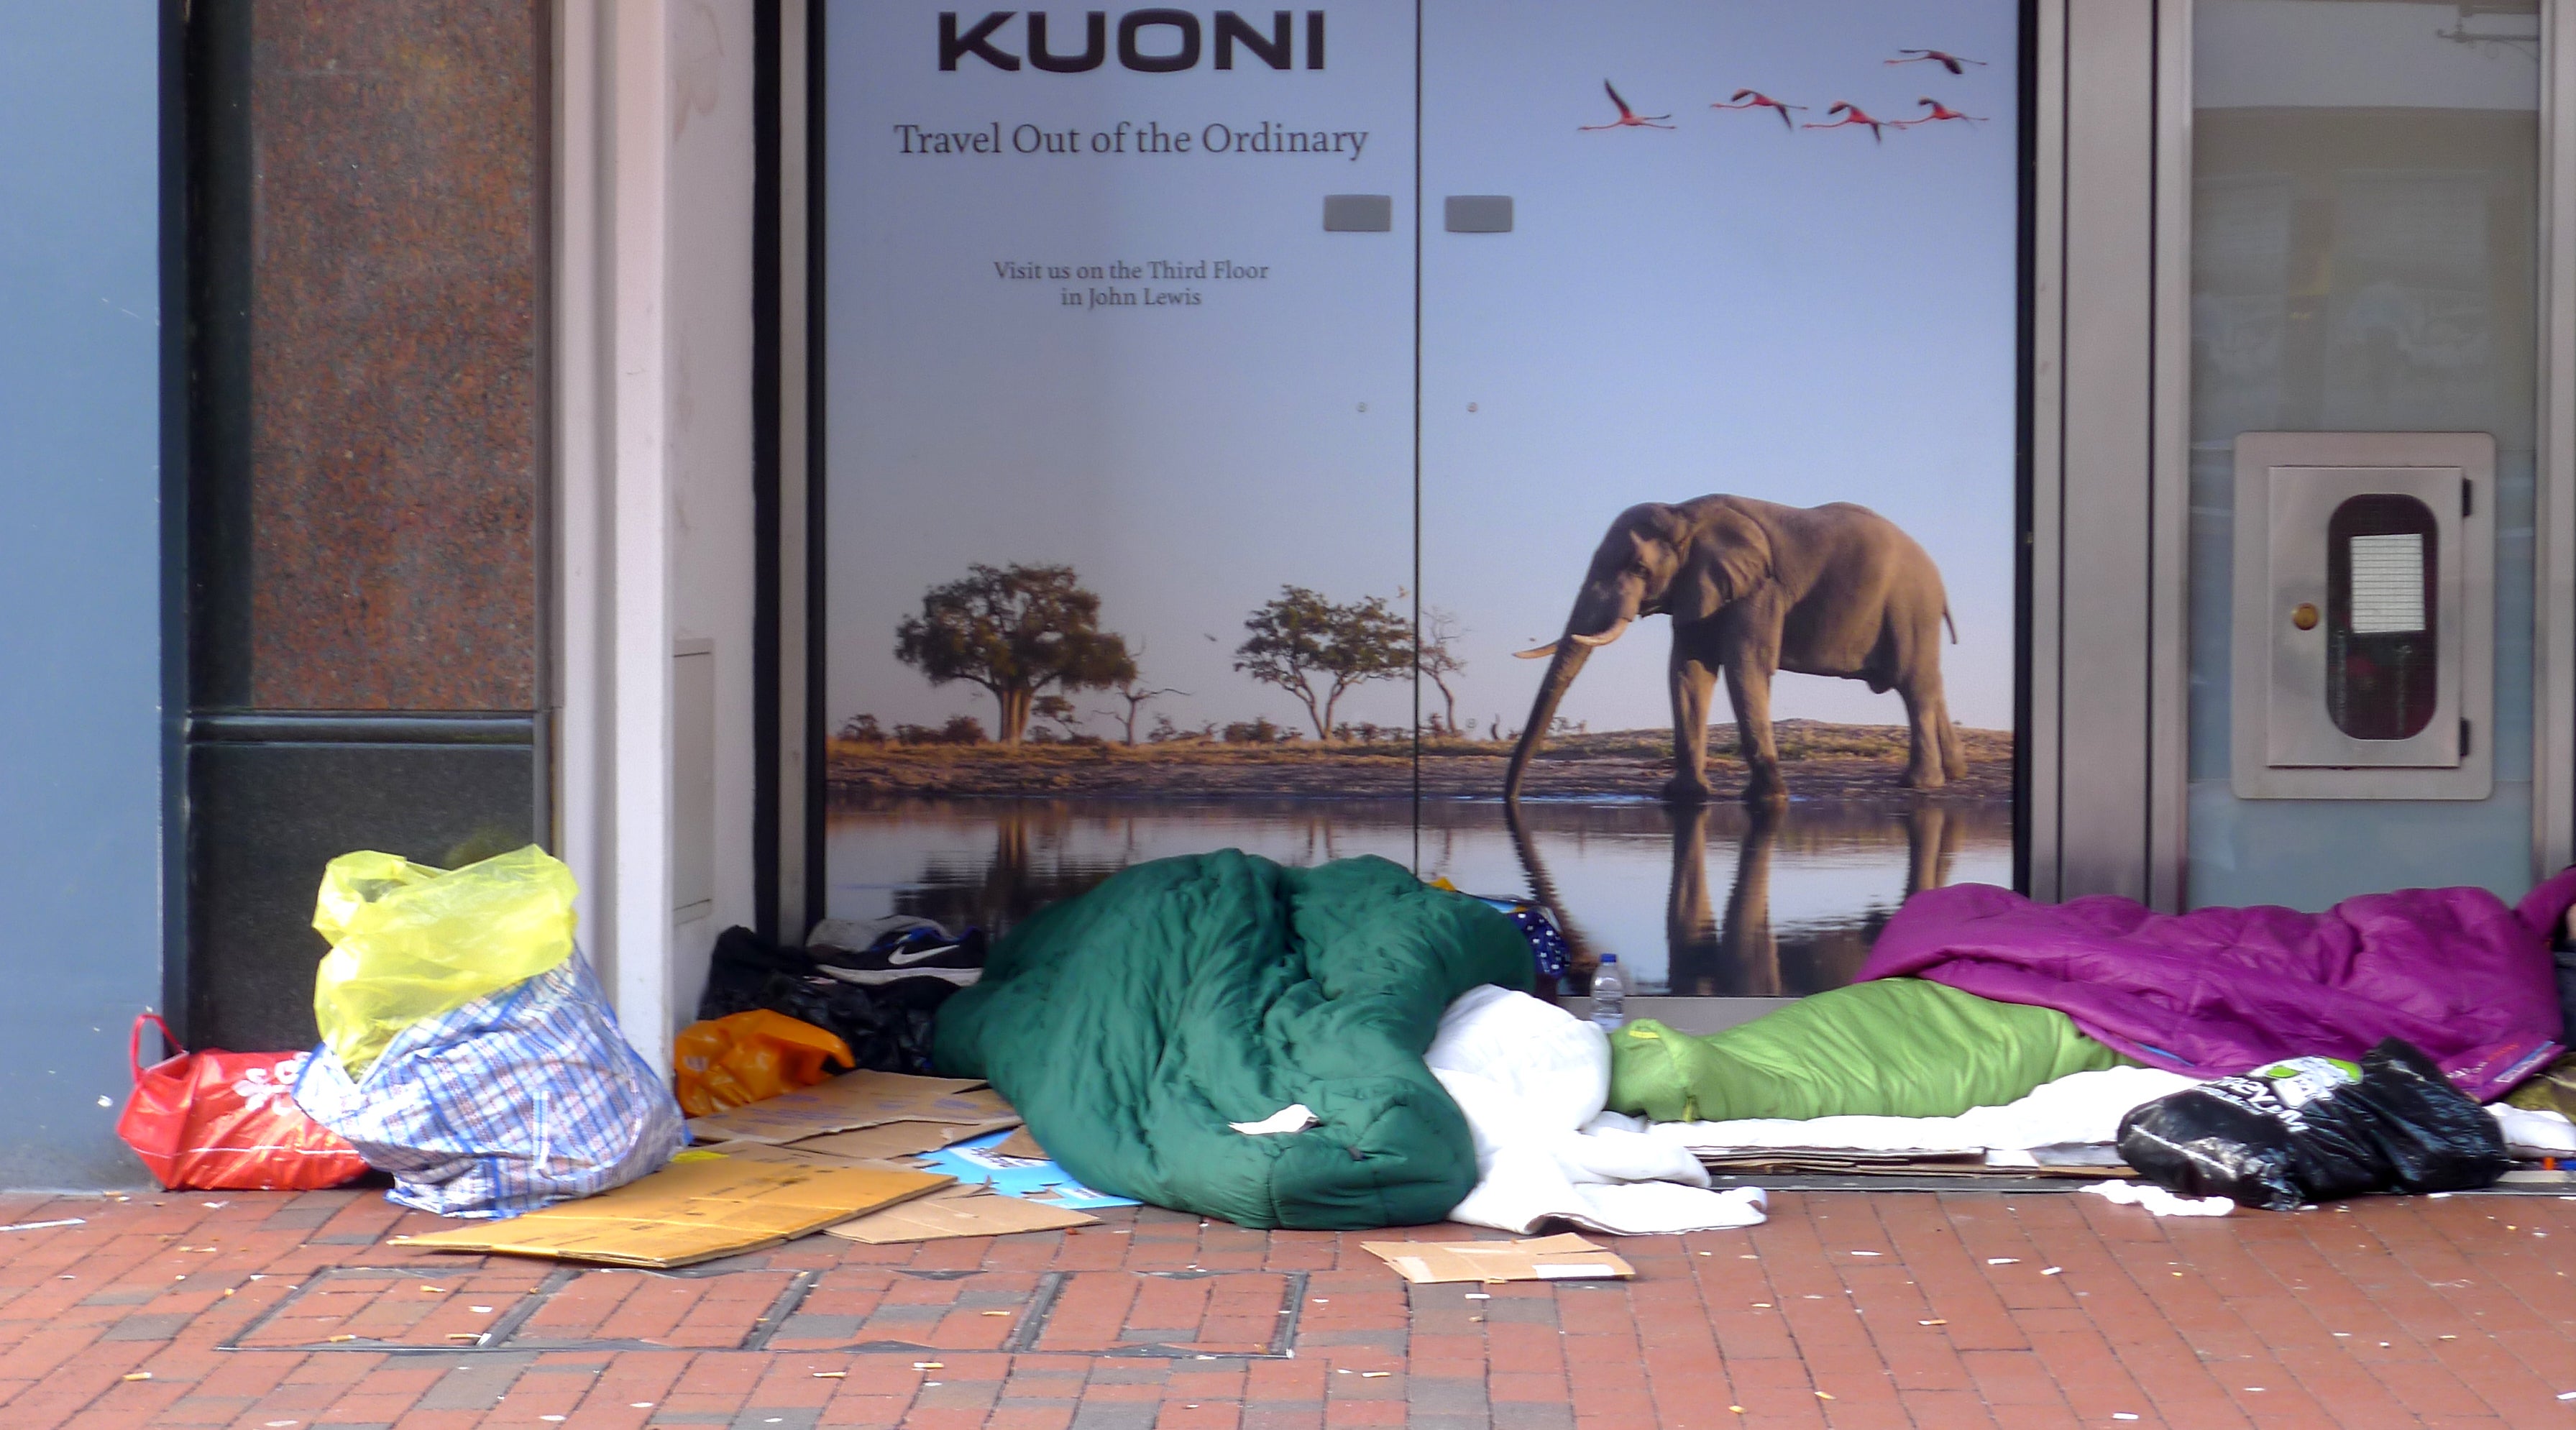 Rough sleeping in England is up 52 percent compared to 2010.